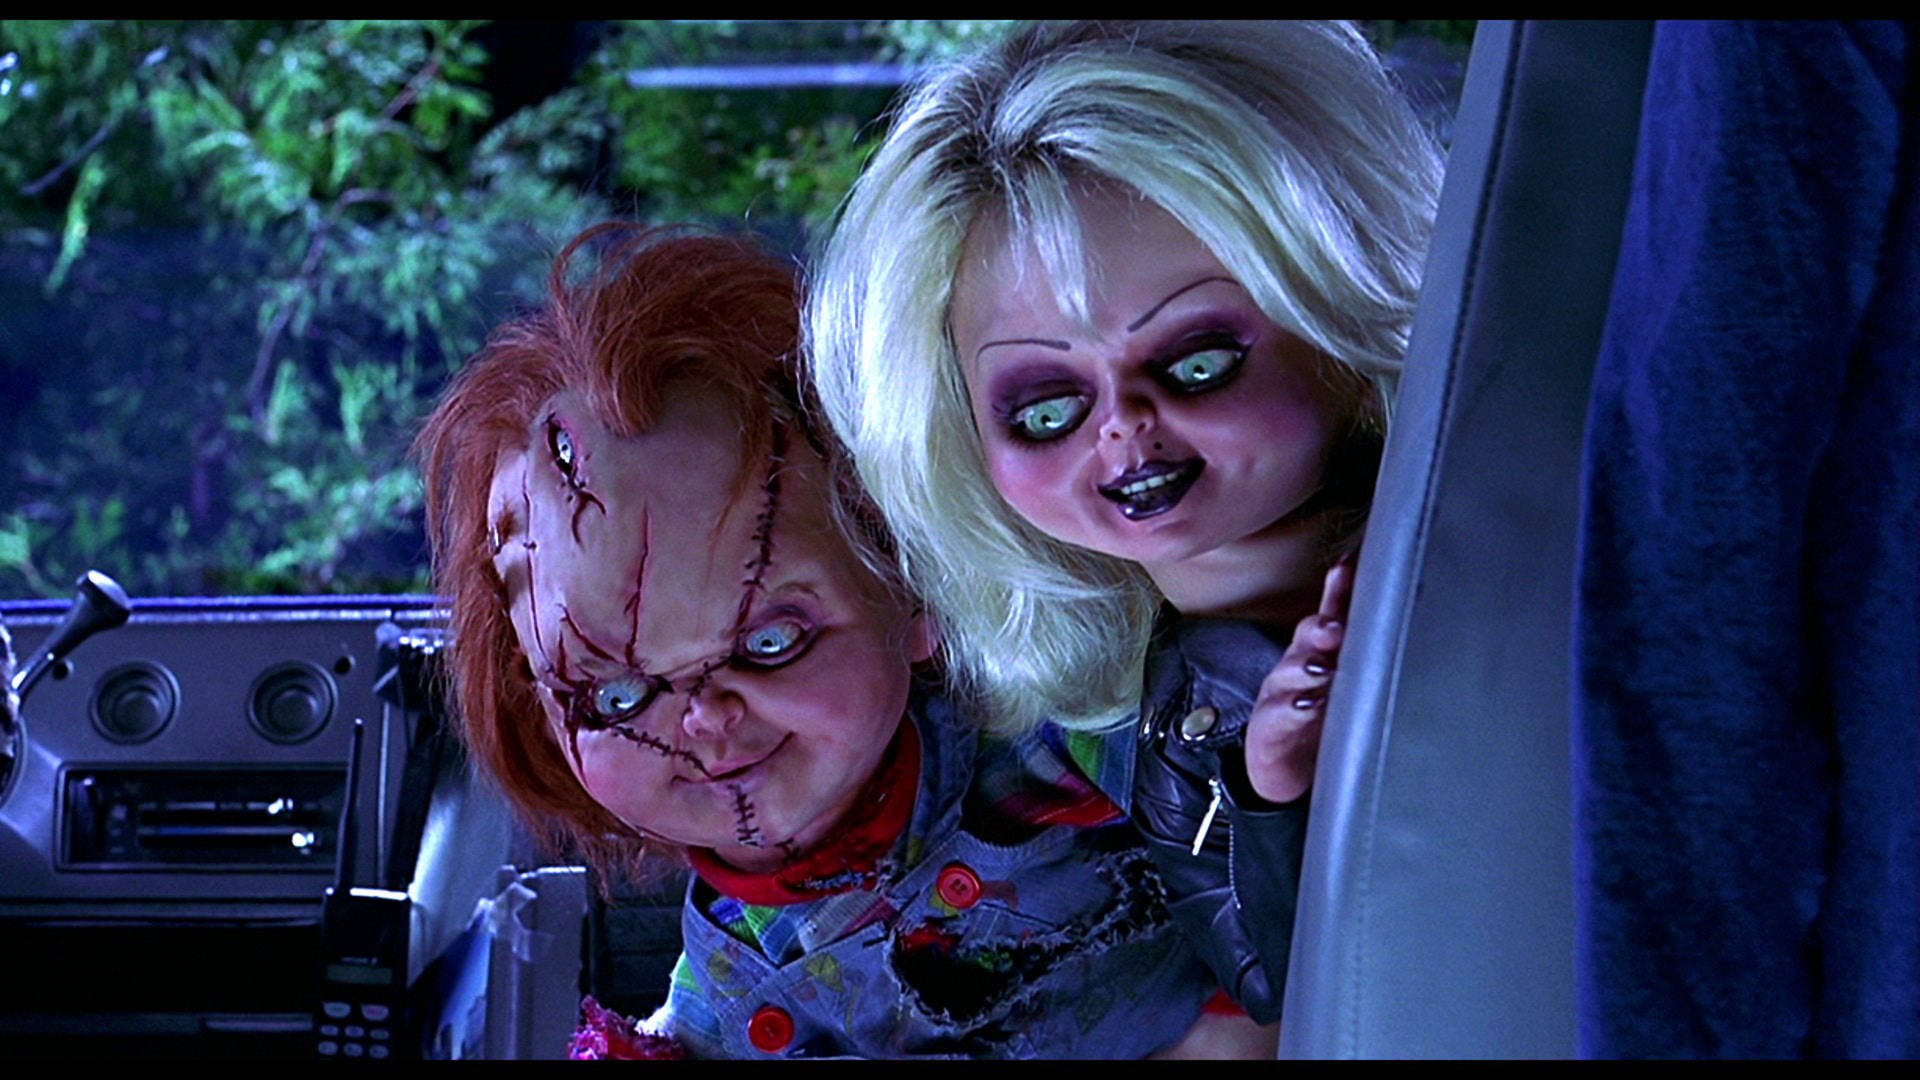 Child's Play Chucky And Tiffany In Car